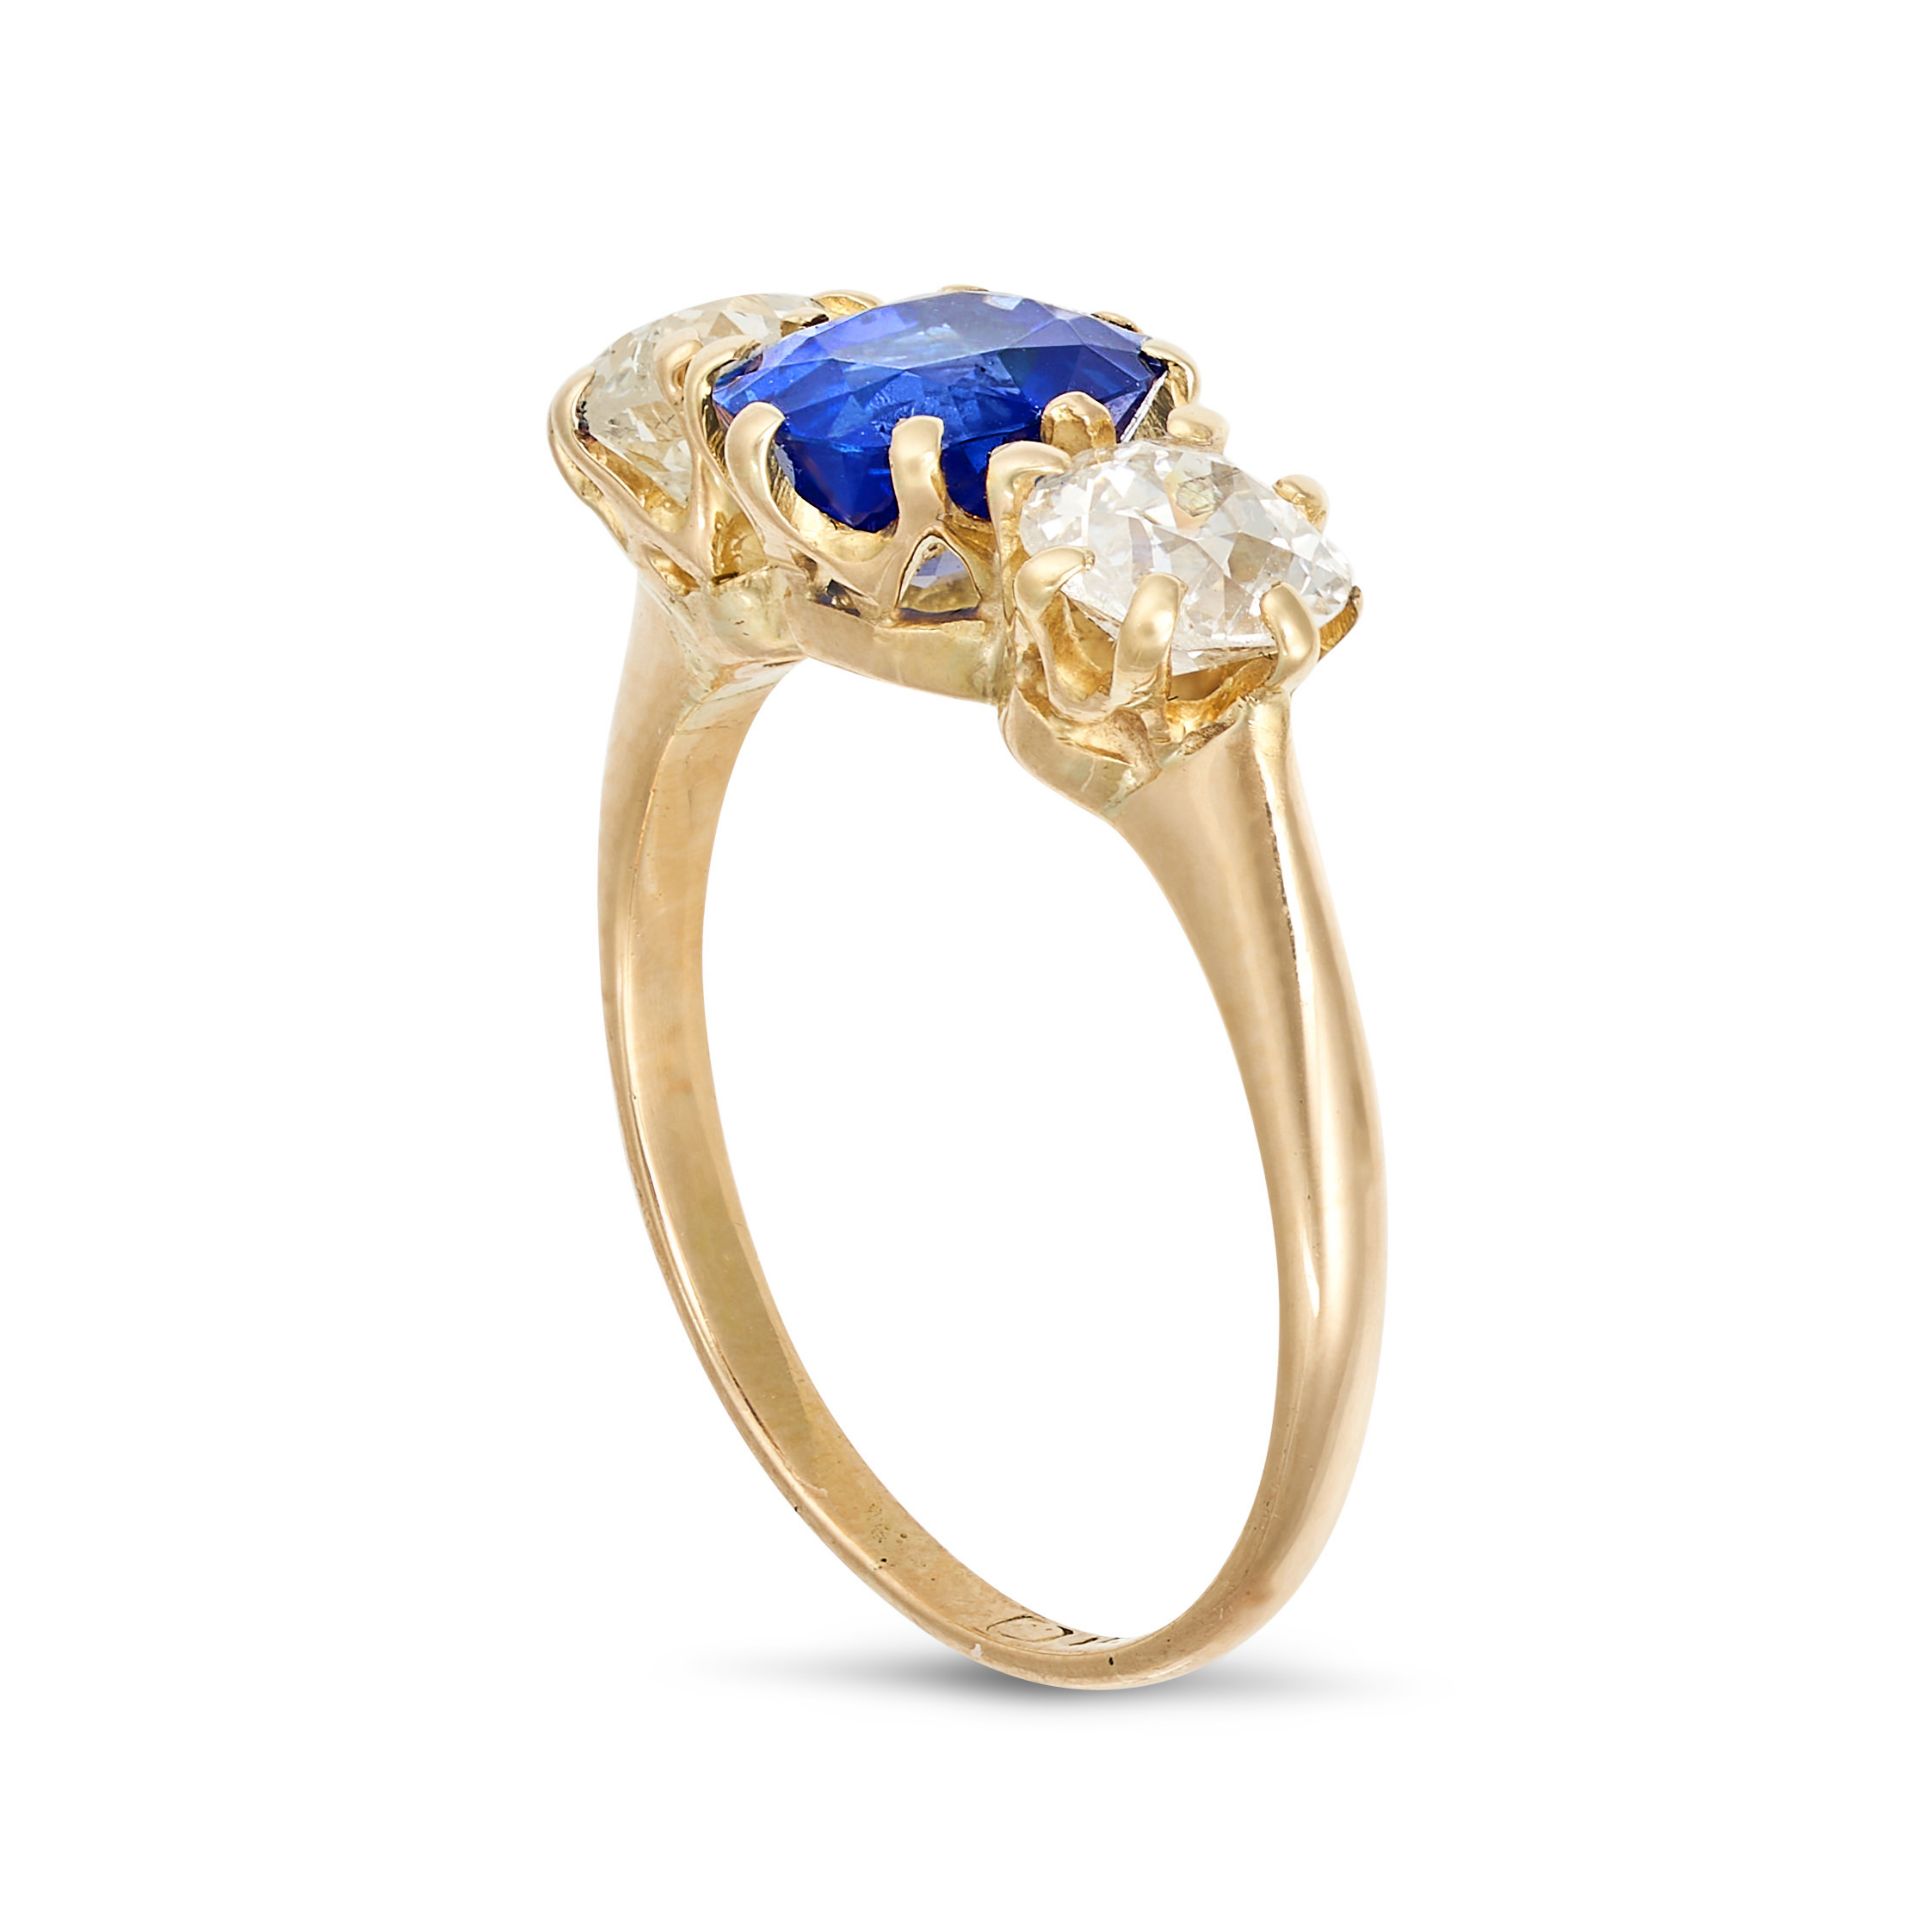 AN UNHEATED KASHMIR SAPPHIRE AND DIAMOND THREE STONE RING in yellow gold, set with a cushion cut ... - Image 2 of 2